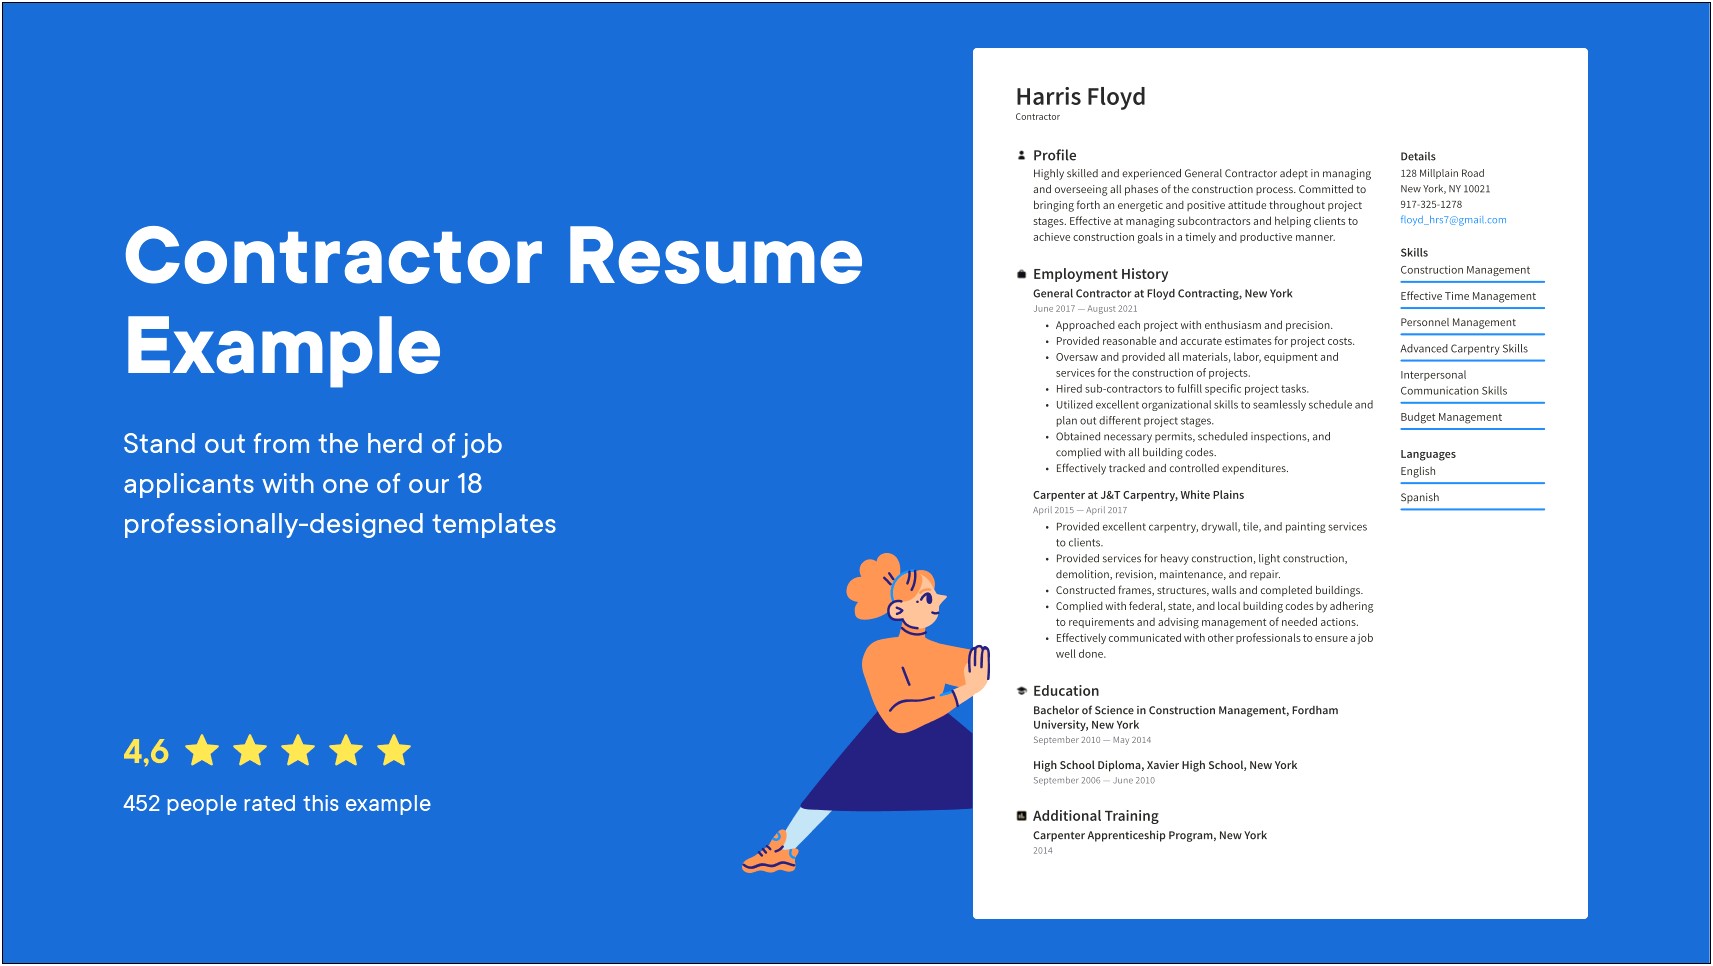 Resume Working As A Contractor Through Staffing Agency